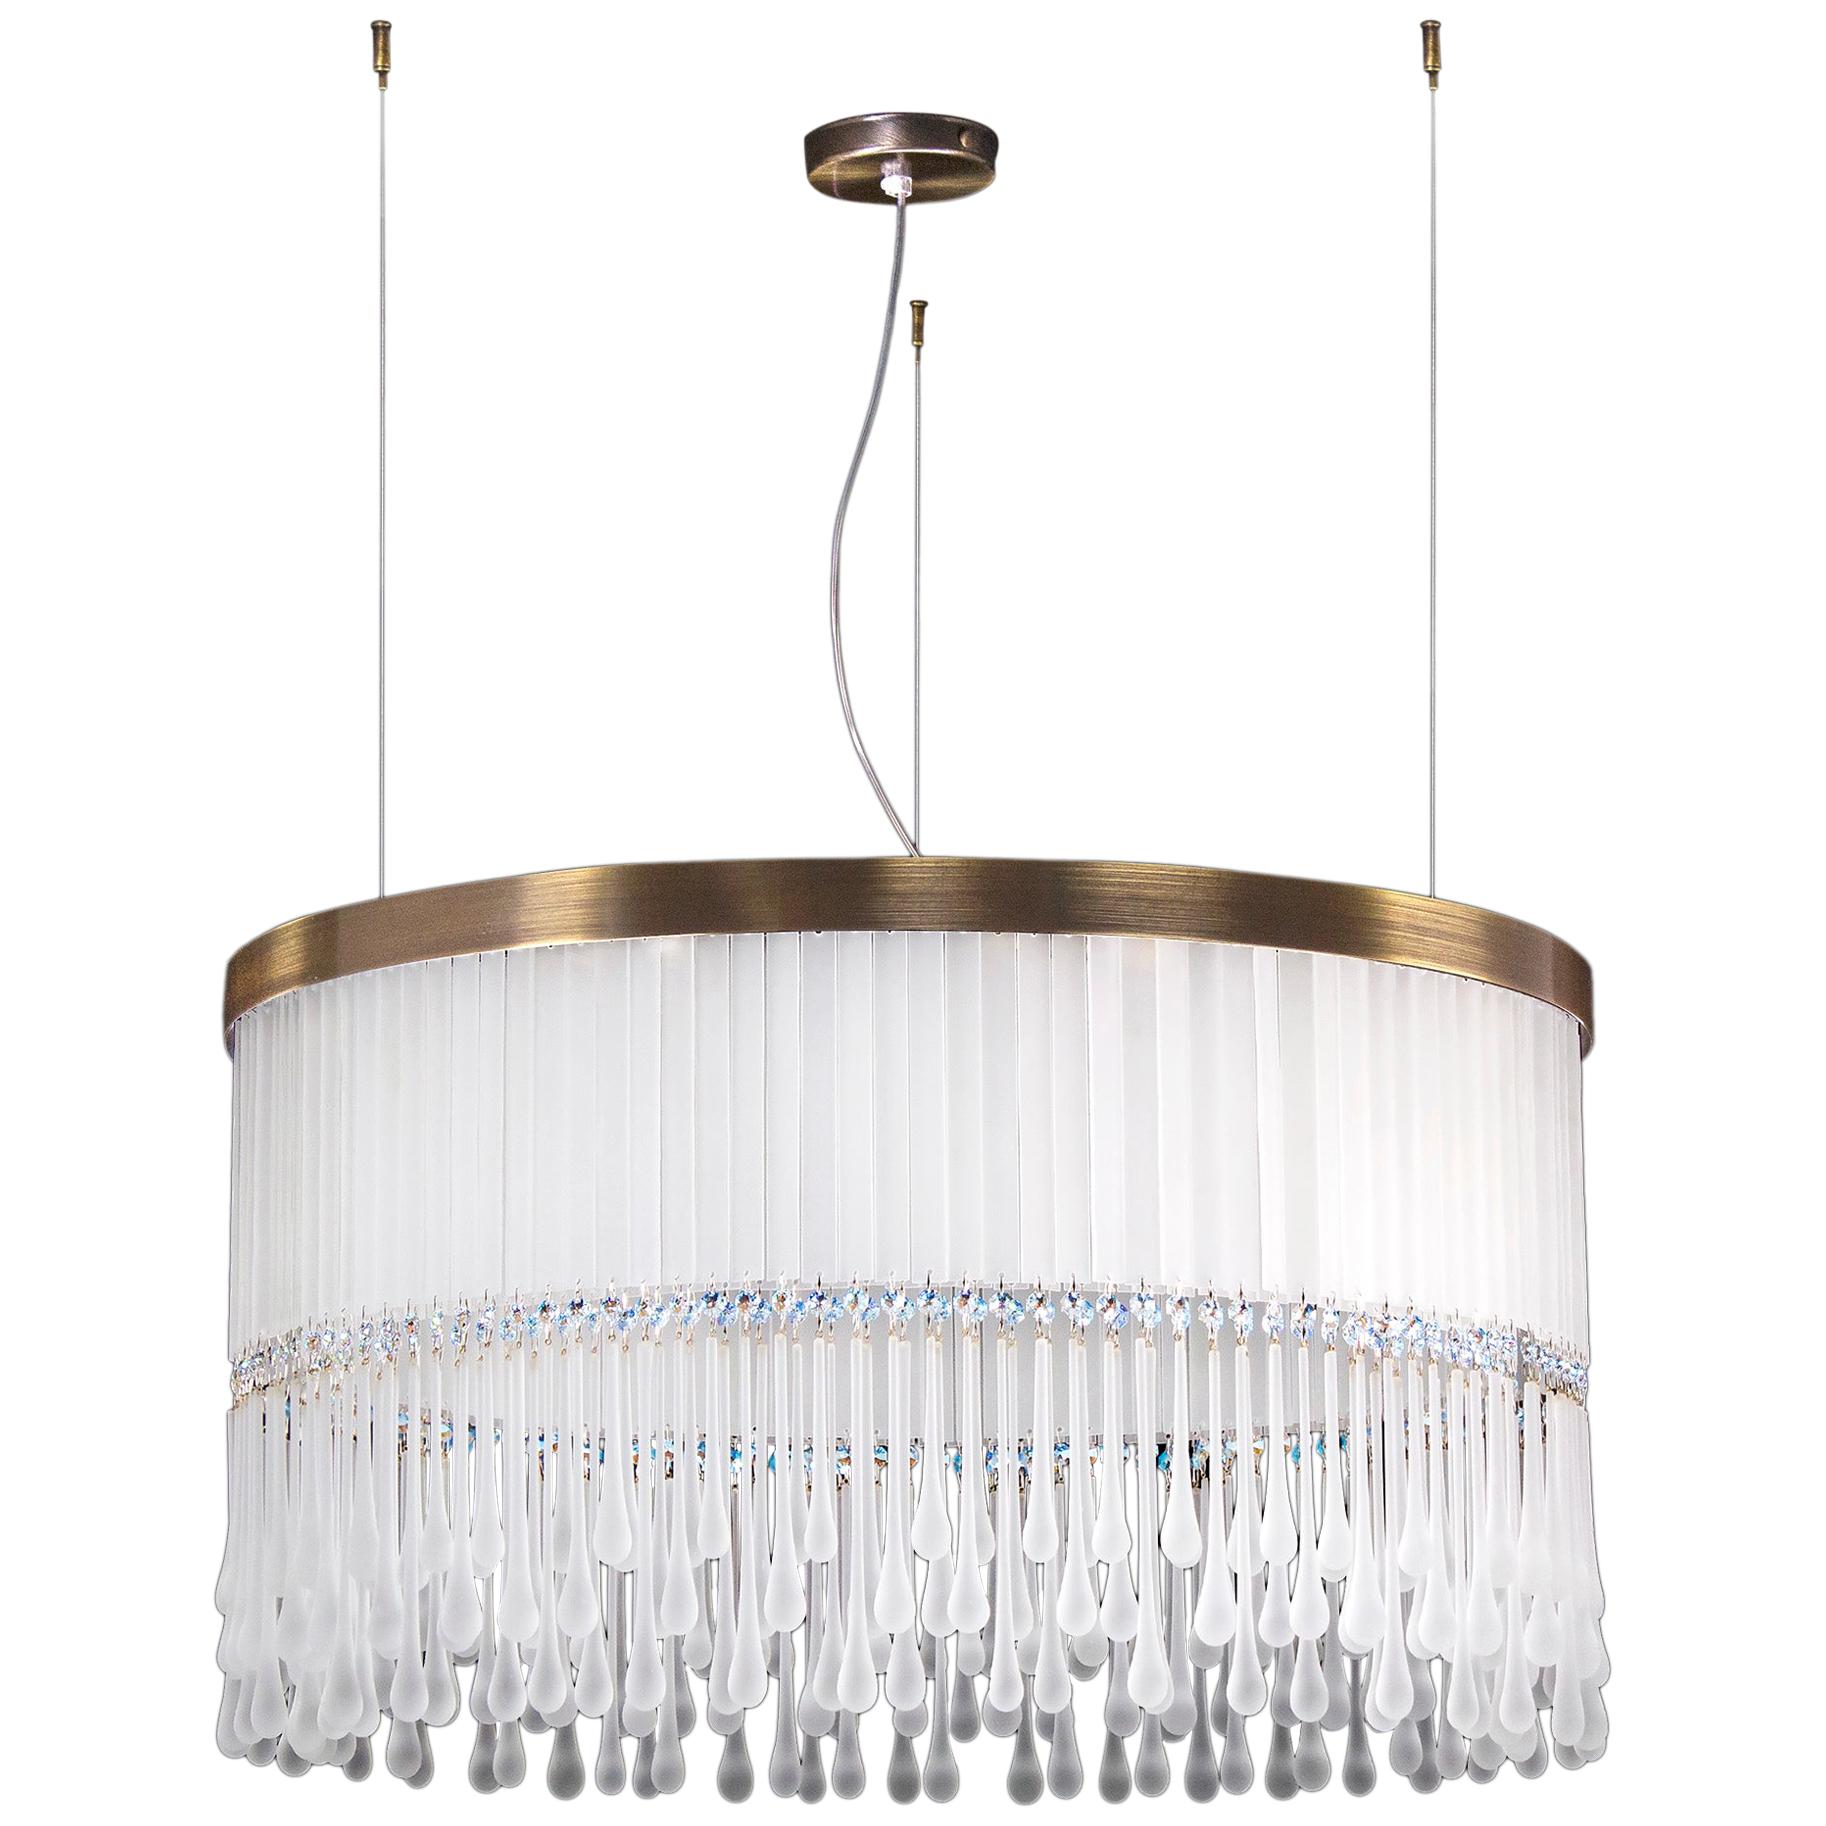  Dancer Suspension Lamp in Grey Murano Glass and crystal elements by Multiforme